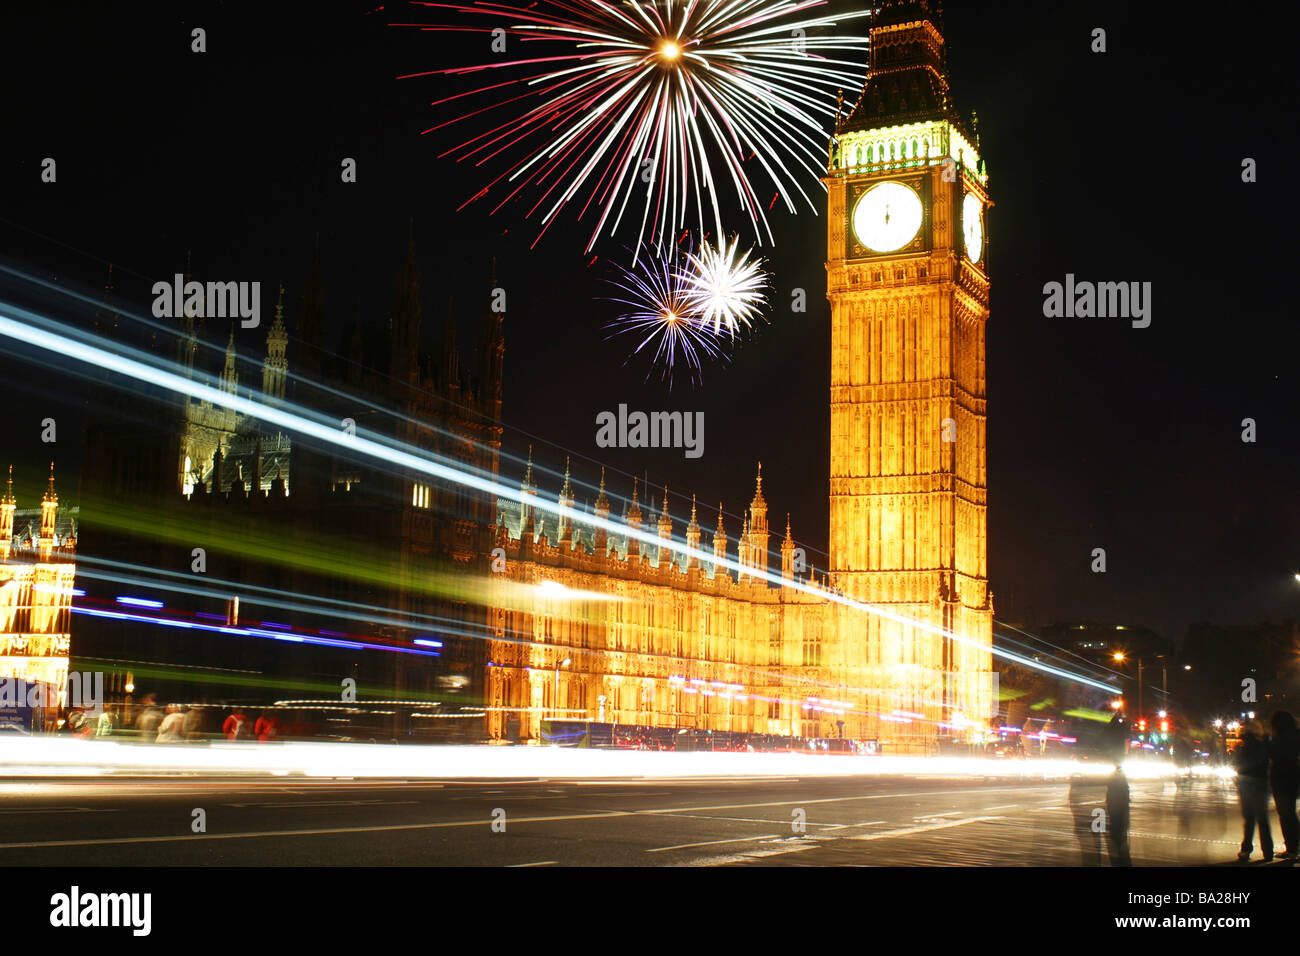 Fireworks New Year's eve Big Ben clock tower at night over tower bridge, London, England Stock Photo